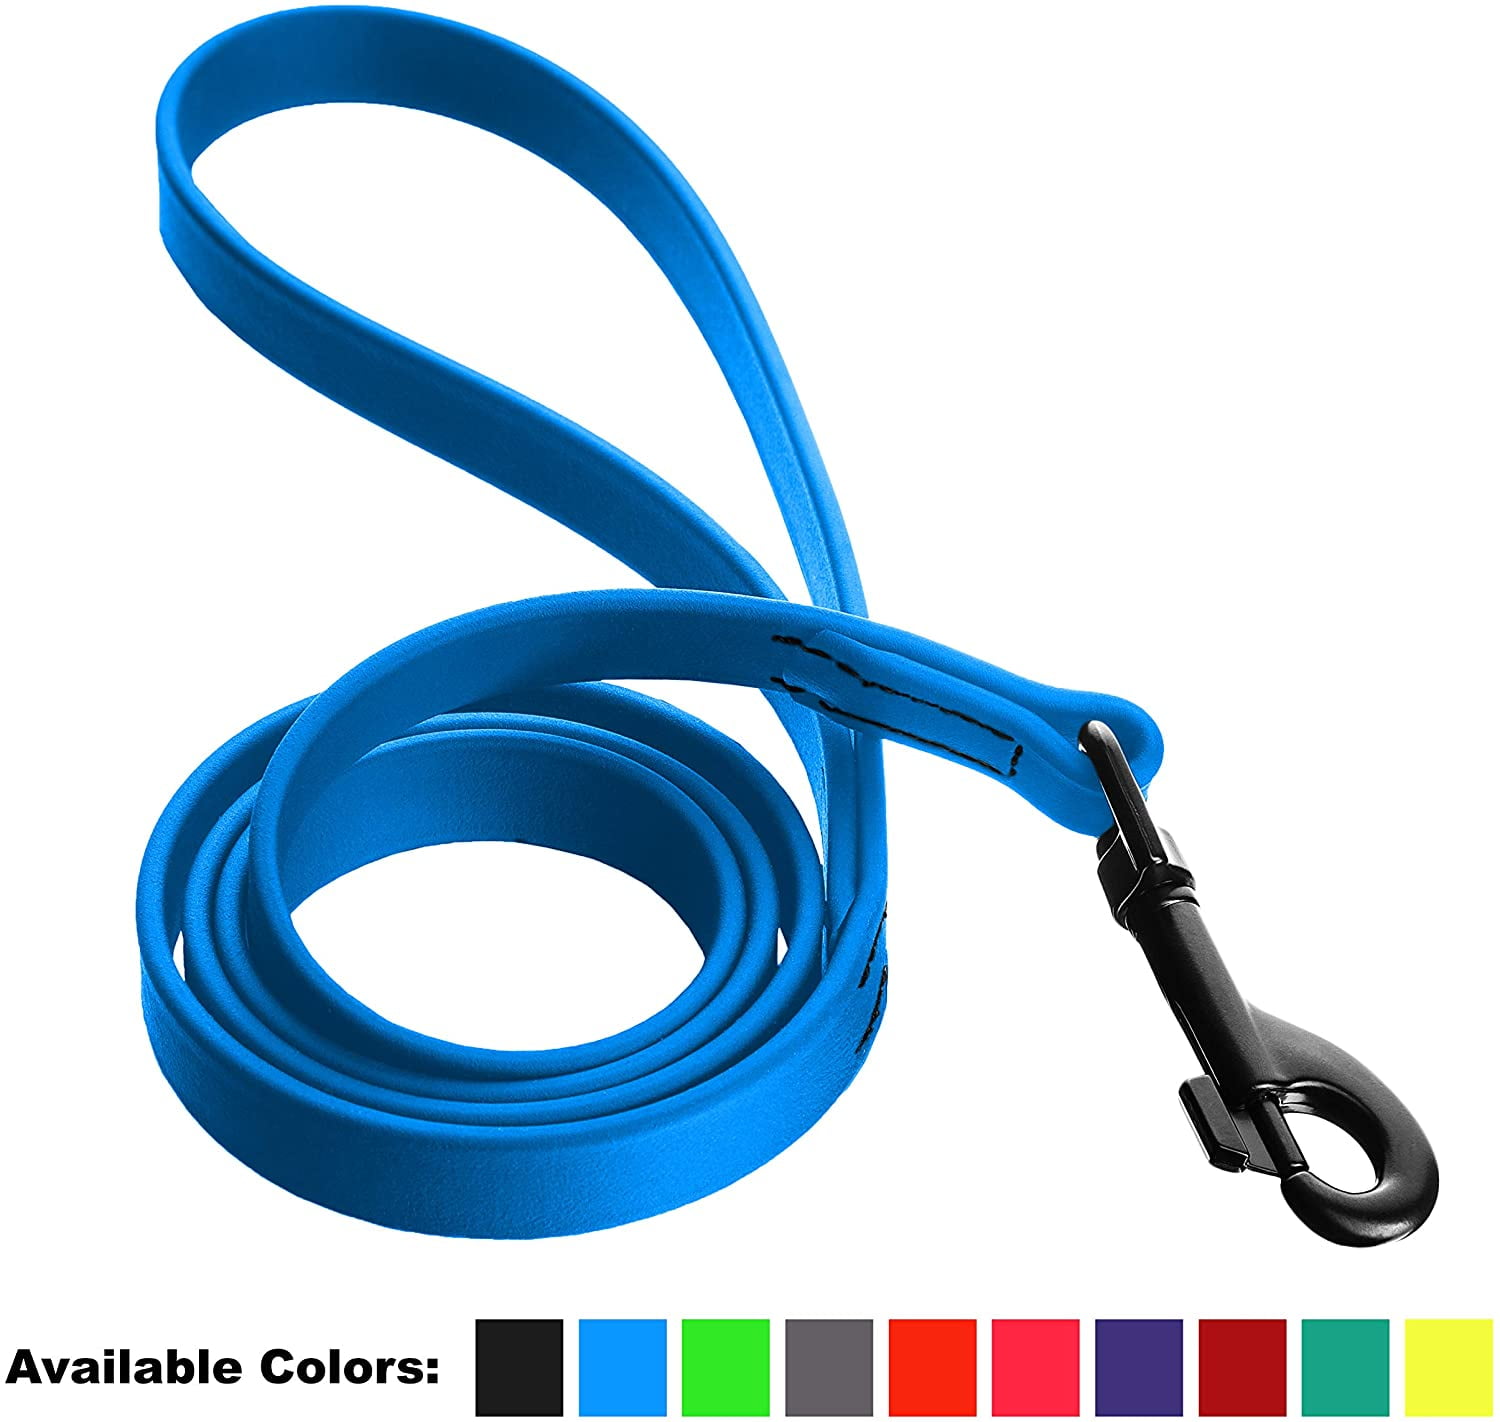 Tracking & Training Line for Beach Yard SarahSays Biothane Dog Leash: 6ft 30ft Field Biothane Long Line for Dogs Play 10ft Swim & Waterproof 